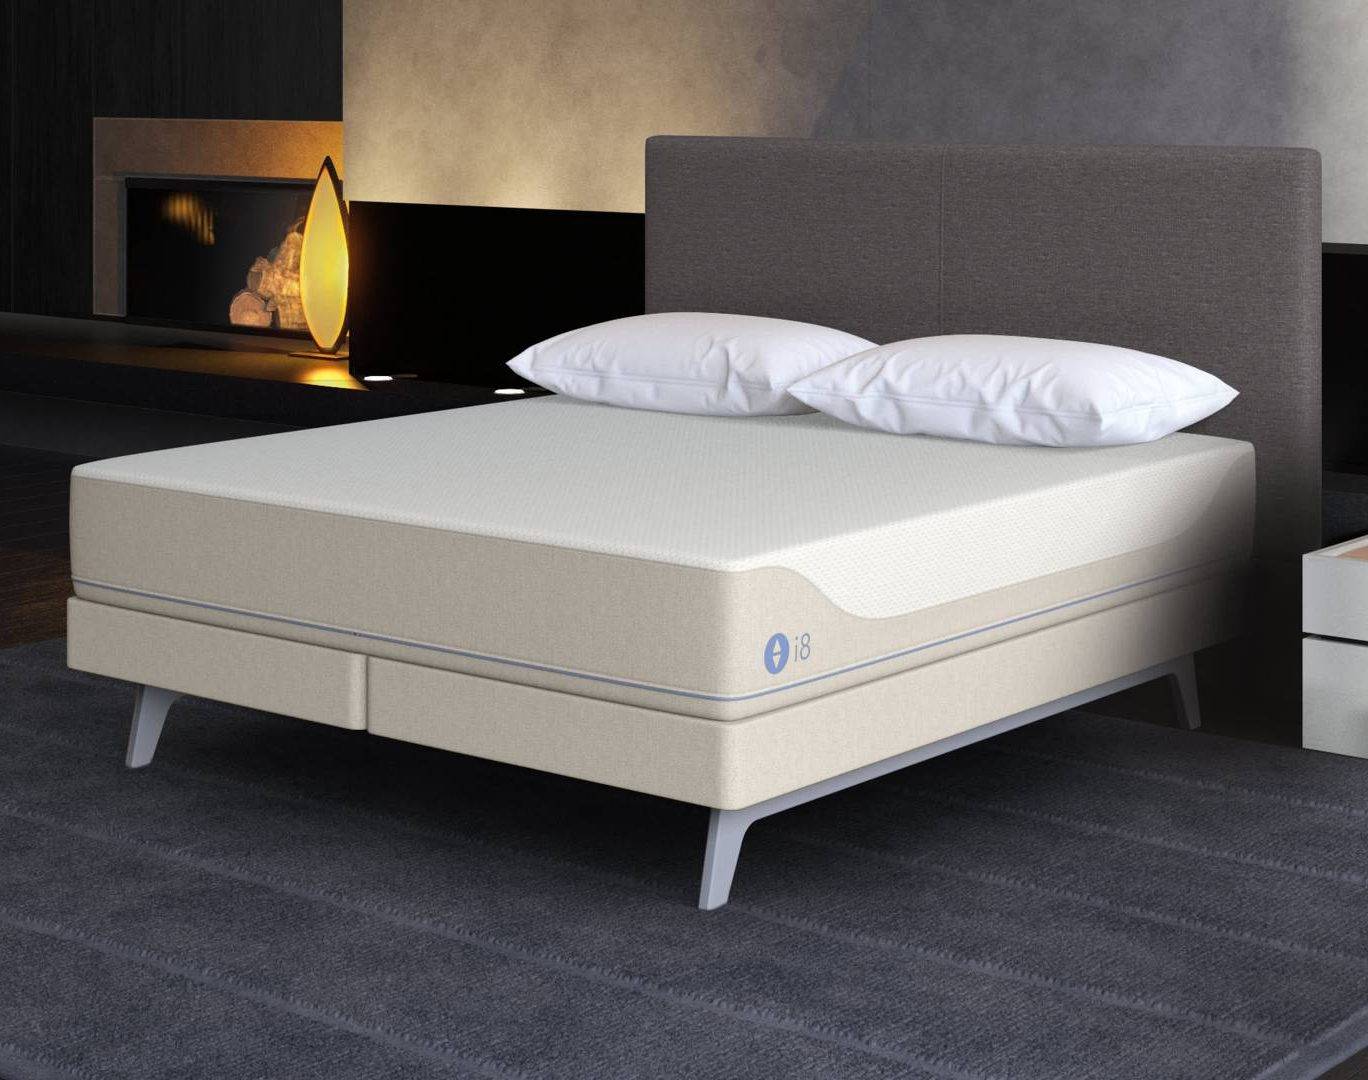 Sleep Number i8 Smart Bed Review